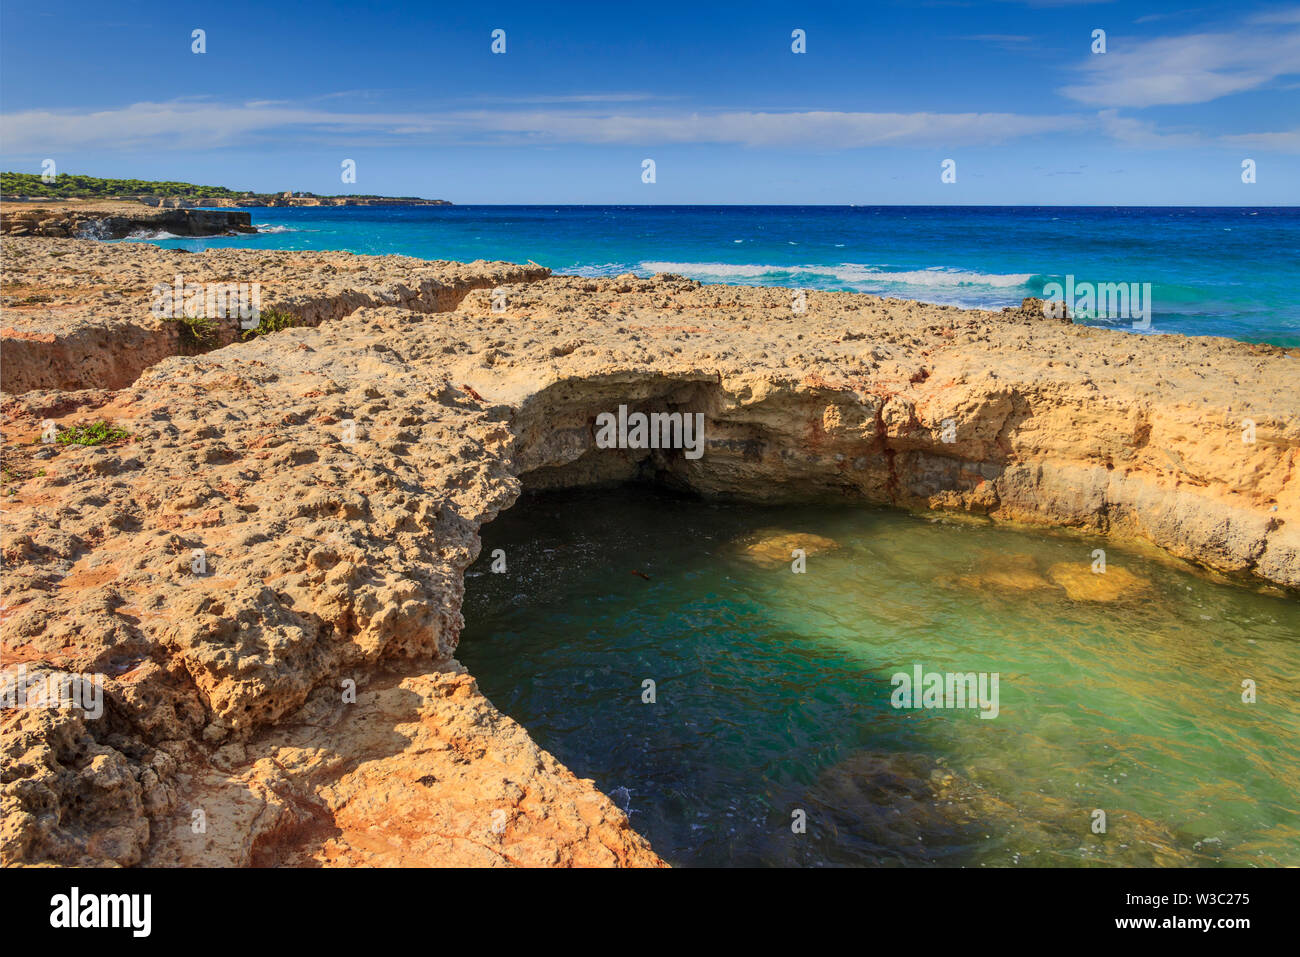 Salento coast: seascape with white rocky cliffs, caves, sea bay. Conca is characterized by small sandy coves and cliffs ( Apulia, ITALY). Stock Photo